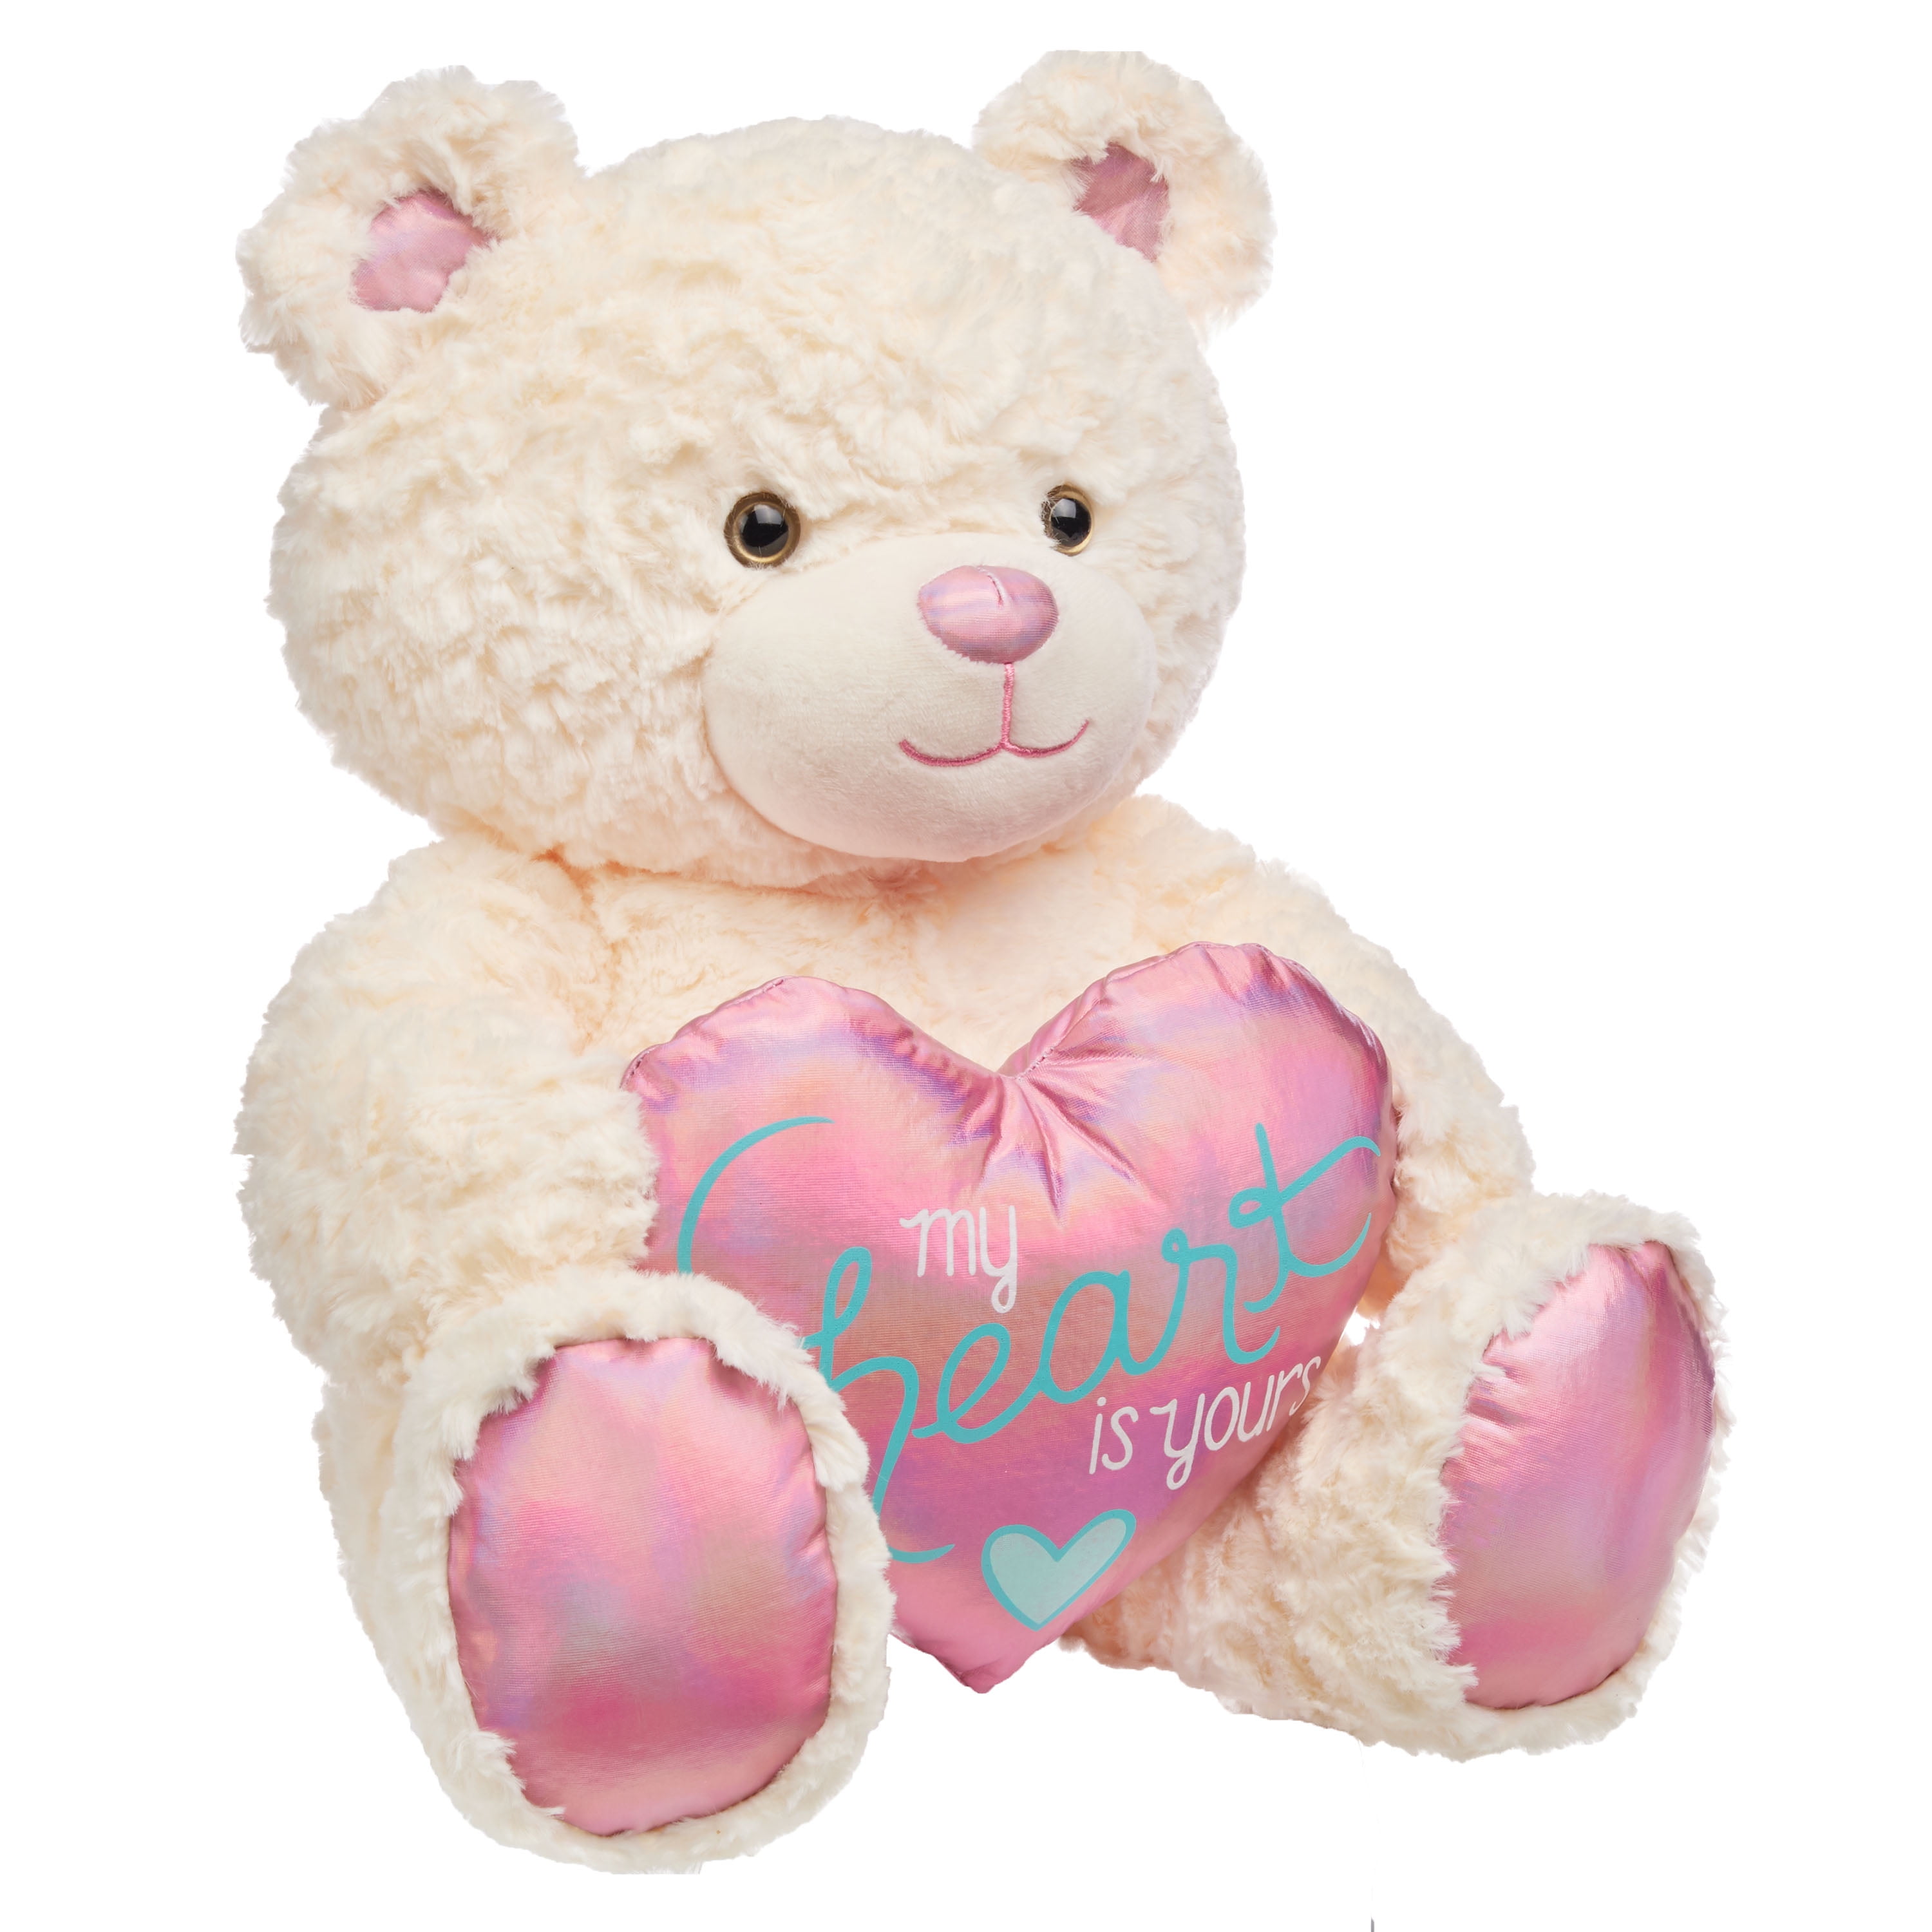 Details about   14" Teddy Bear Valentine Stuffed Animal Plush Sweet Hearts White Pink Heart NEW